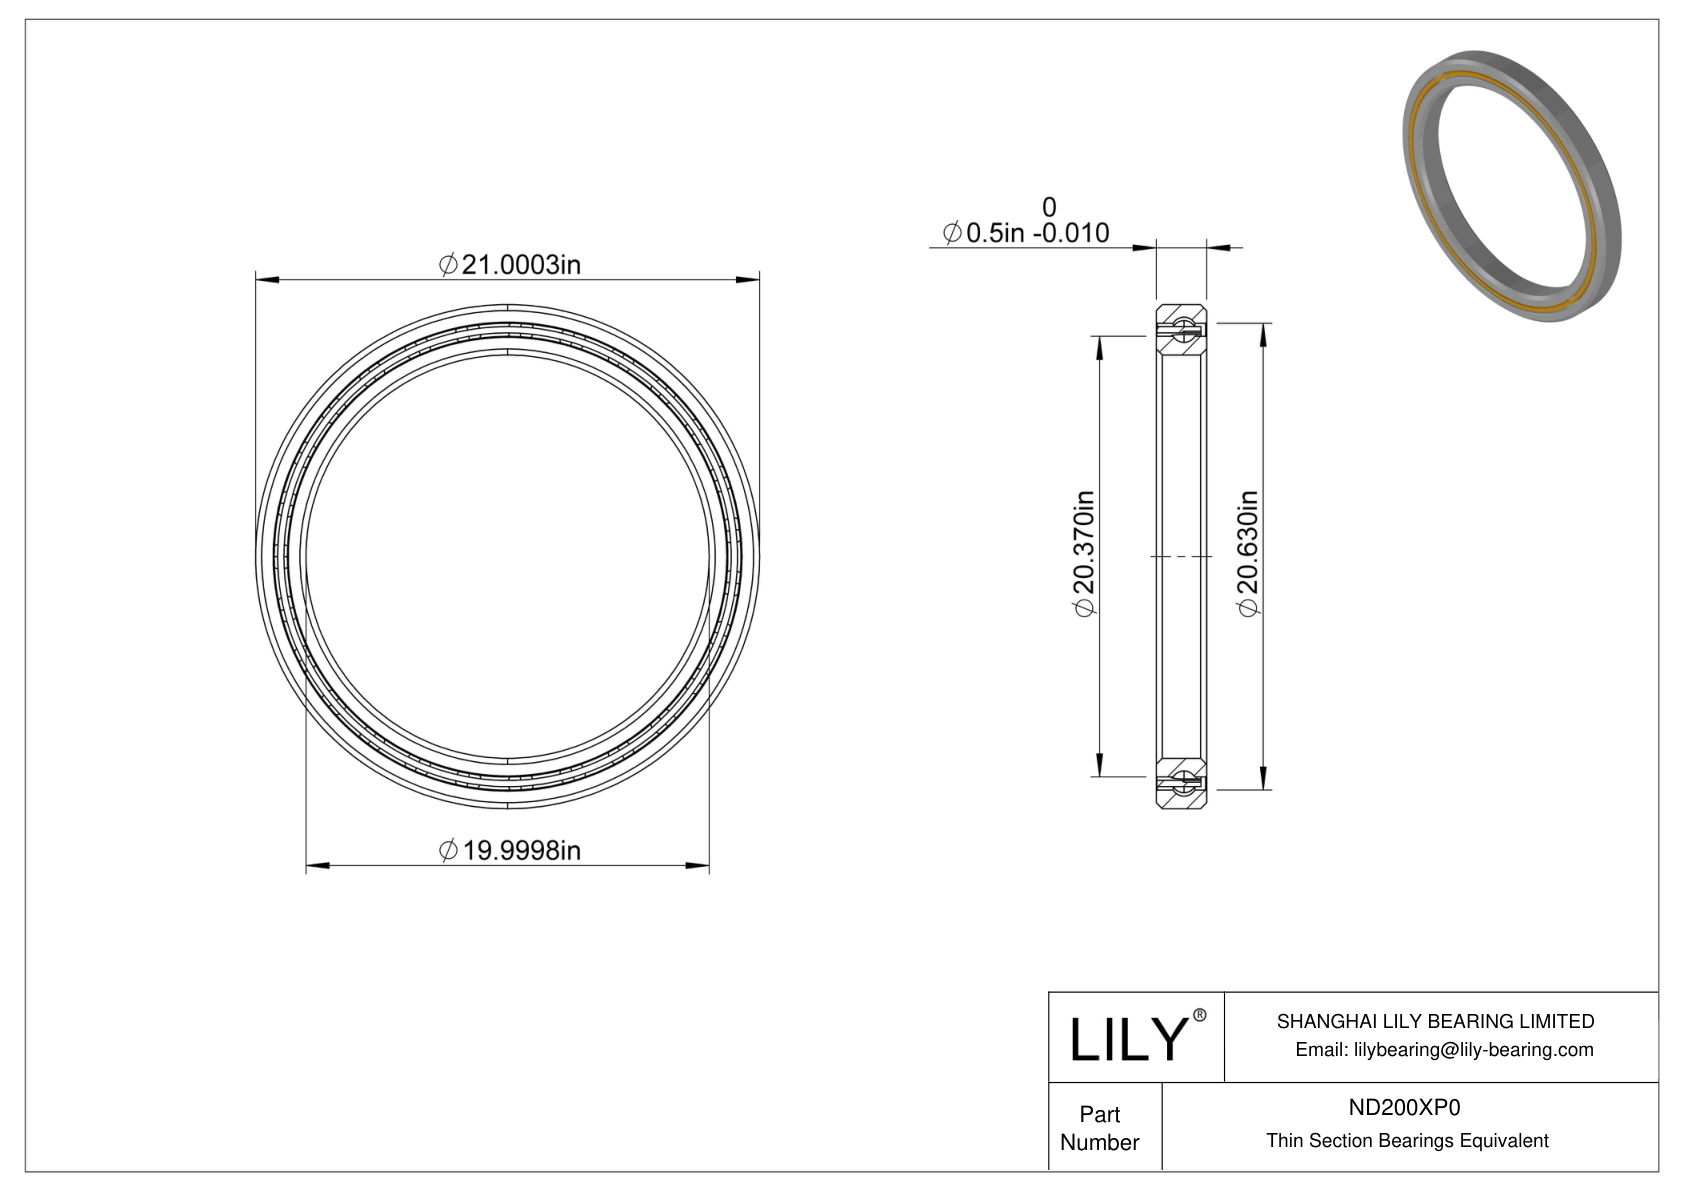 ND200XP0 Constant Section (CS) Bearings cad drawing